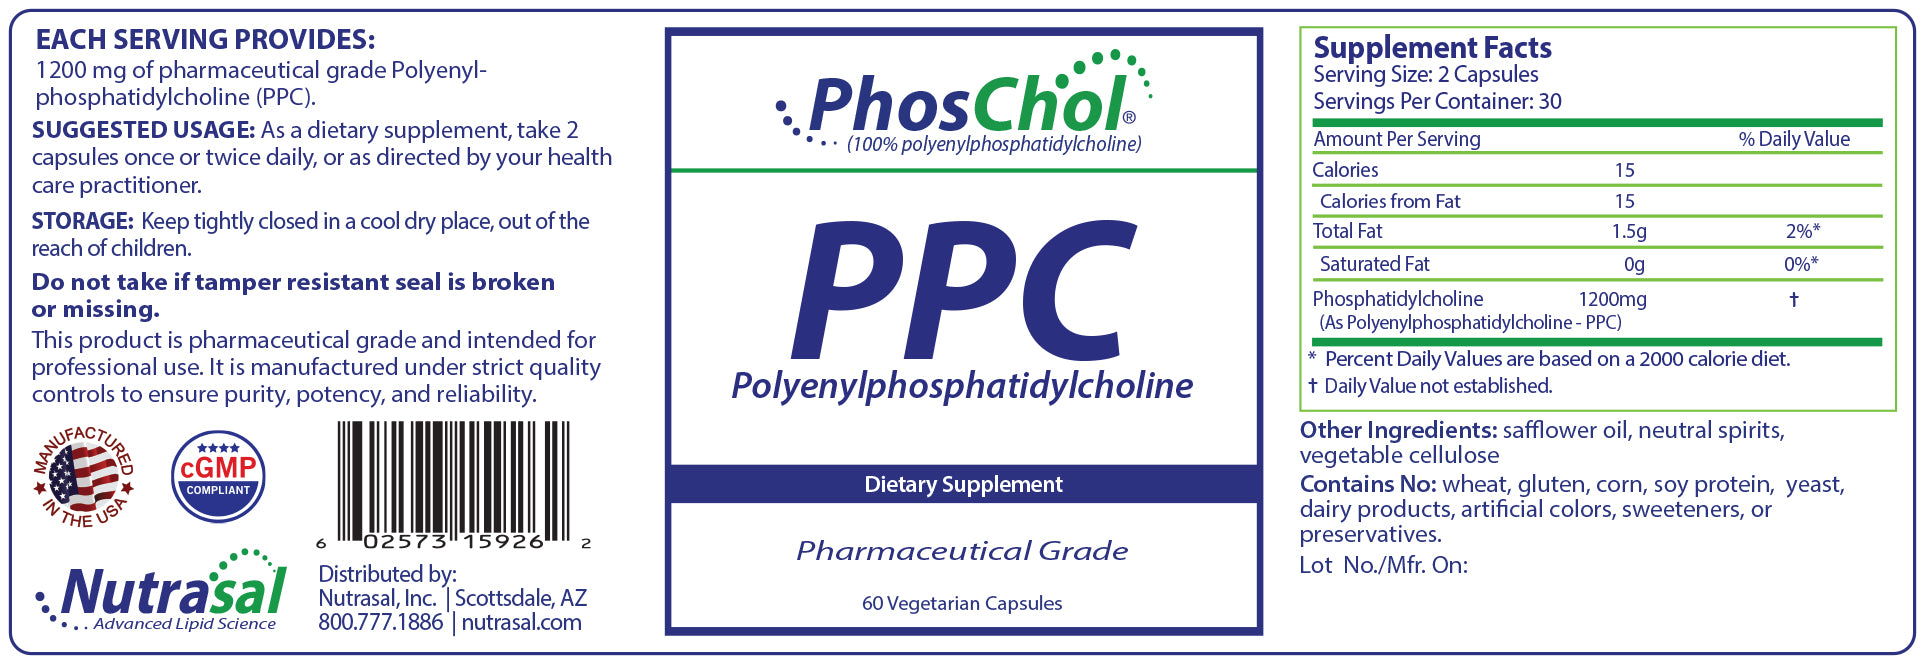 PhosChol PPC is a superior cell membrane therapeutic that supports Liver, Brain, Gut, Heart, Blood Vessels, cell metabolism, detox and more